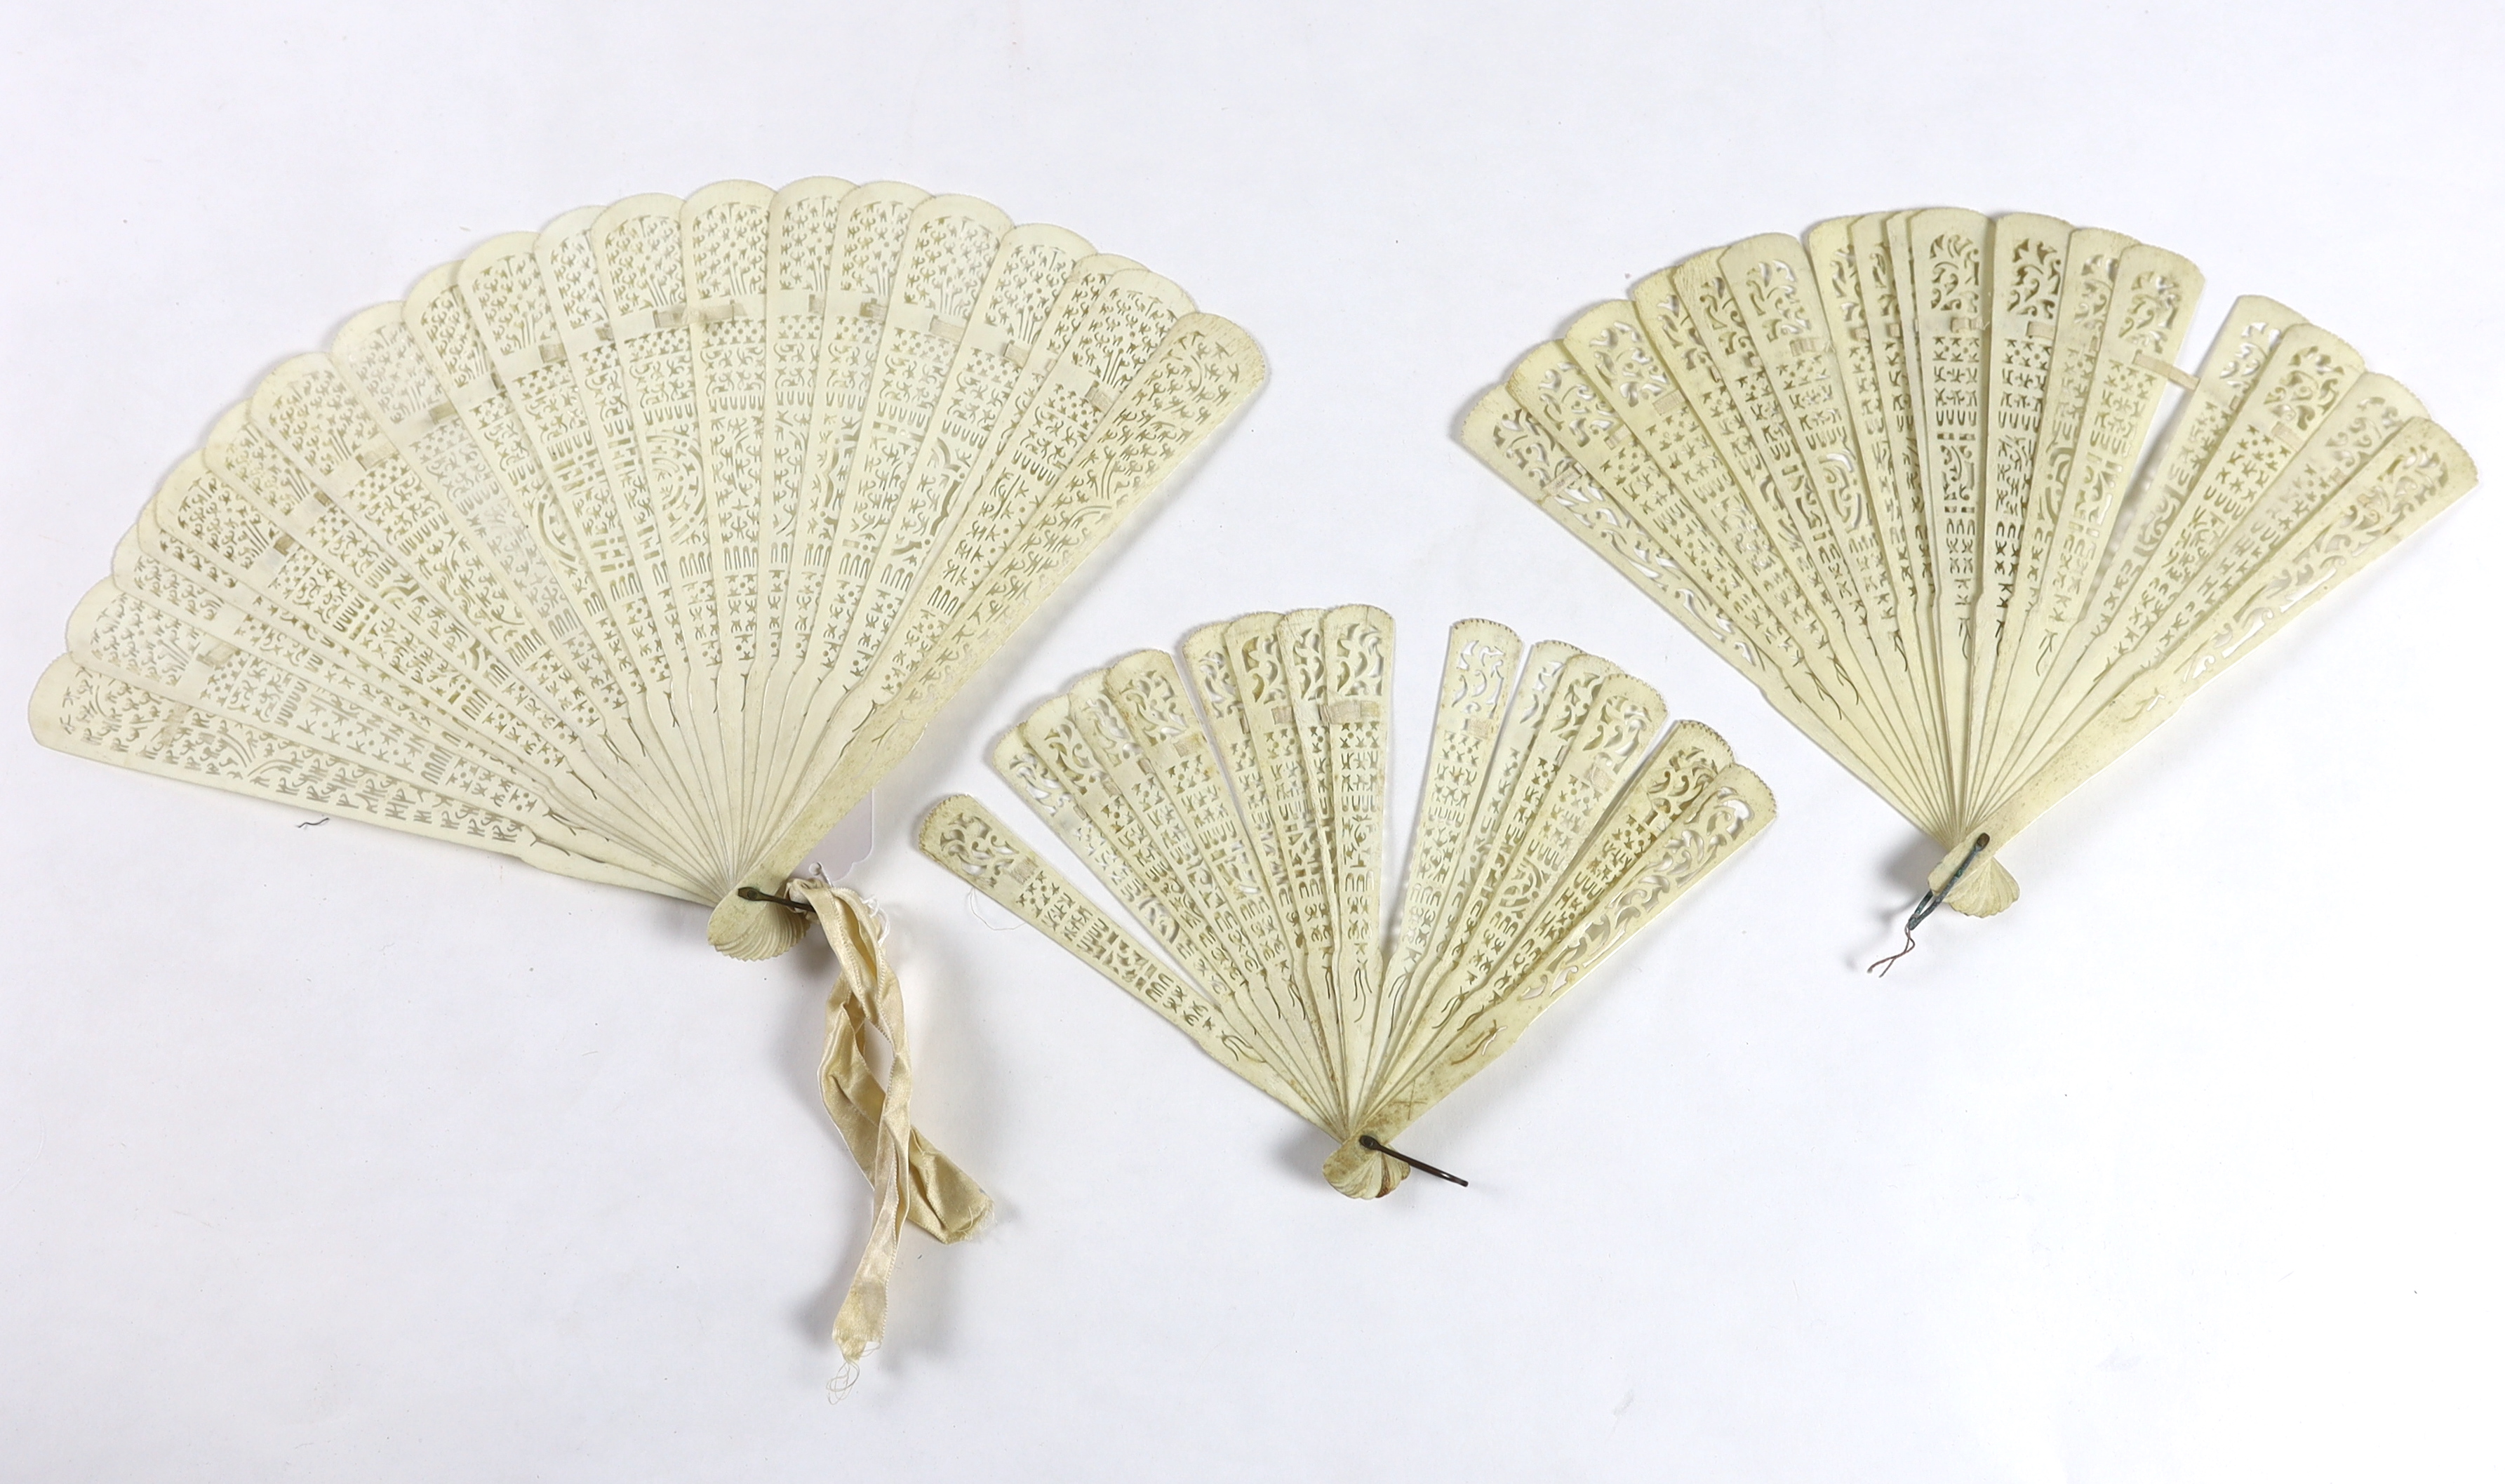 Three late 19th century 19th / early 20th century Chinese bone brisé fans                                                                                                                                                   